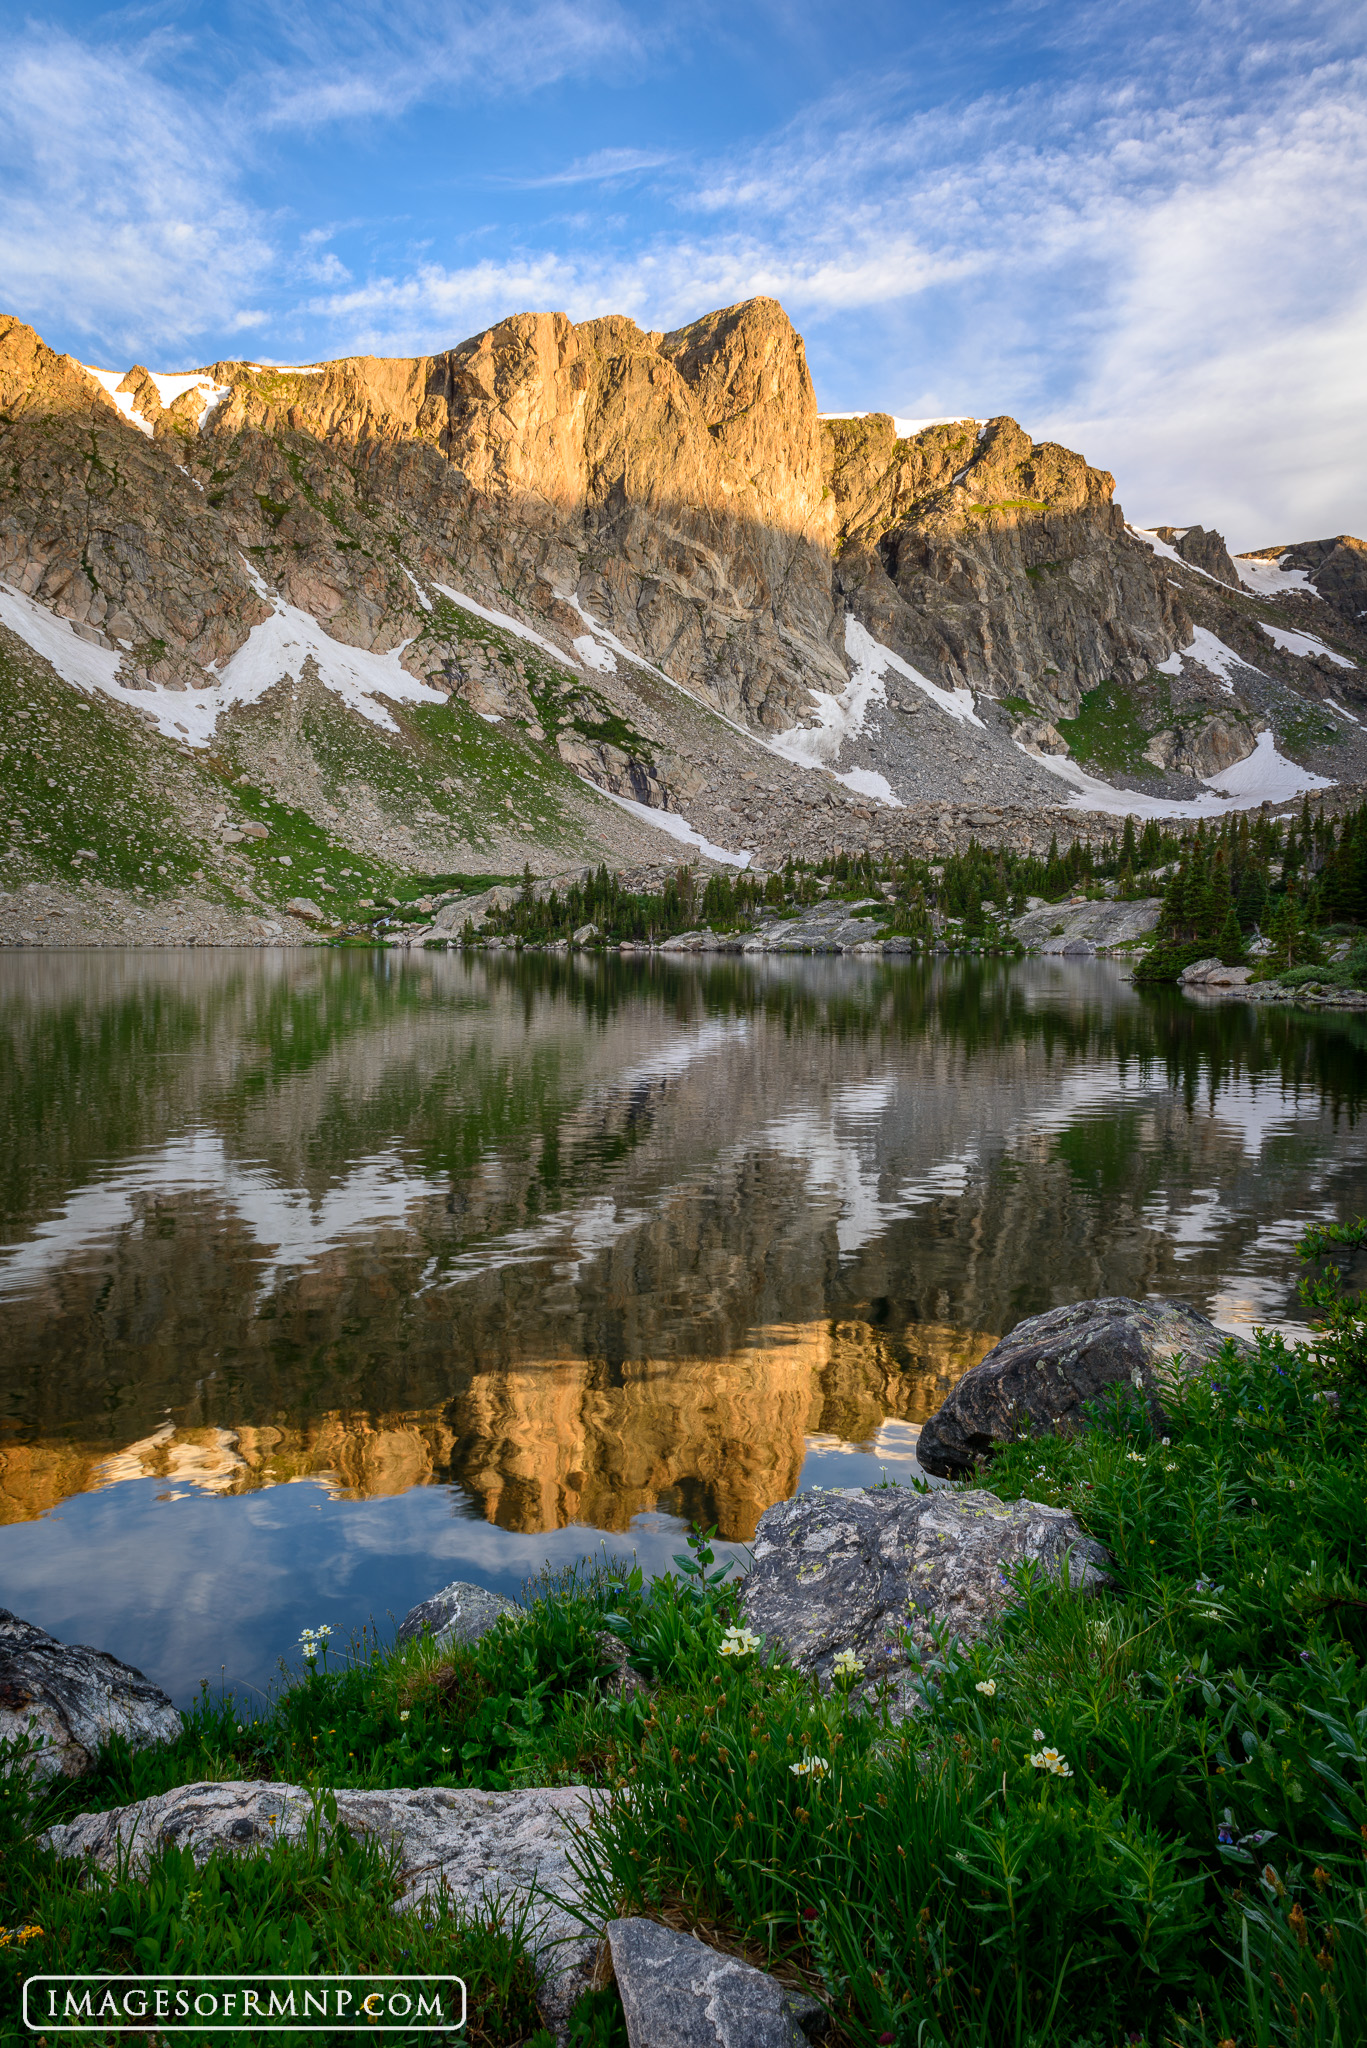 For more information on this image and for purchasing options, please visit the Images of RMNP website or call the gallery at...